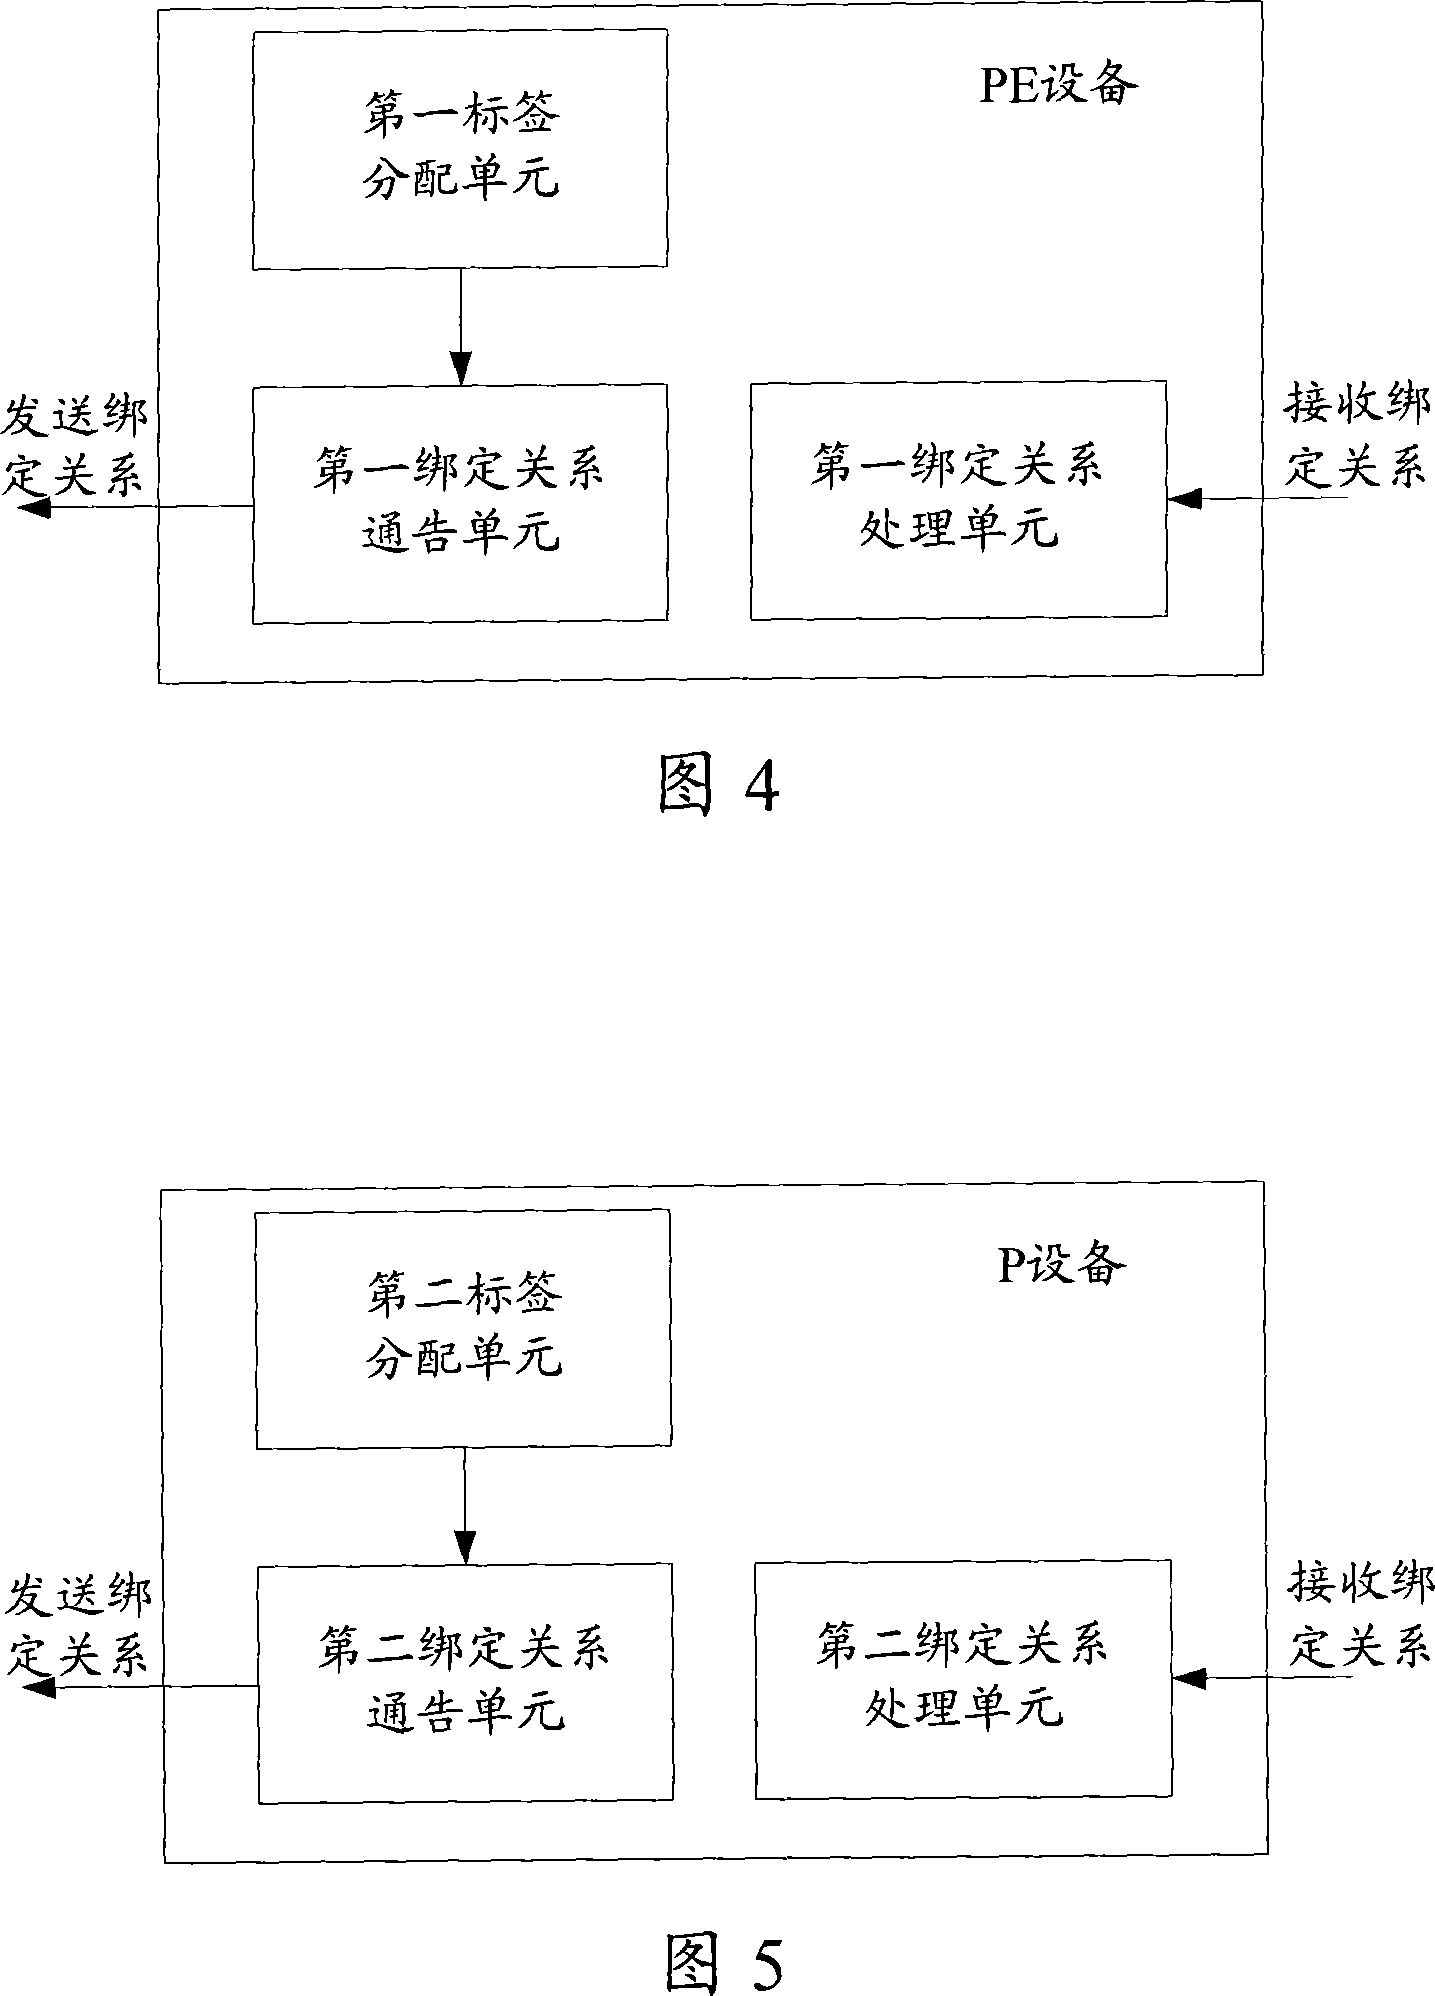 Label exchange route setting method, system and equipment of virtual special network channel